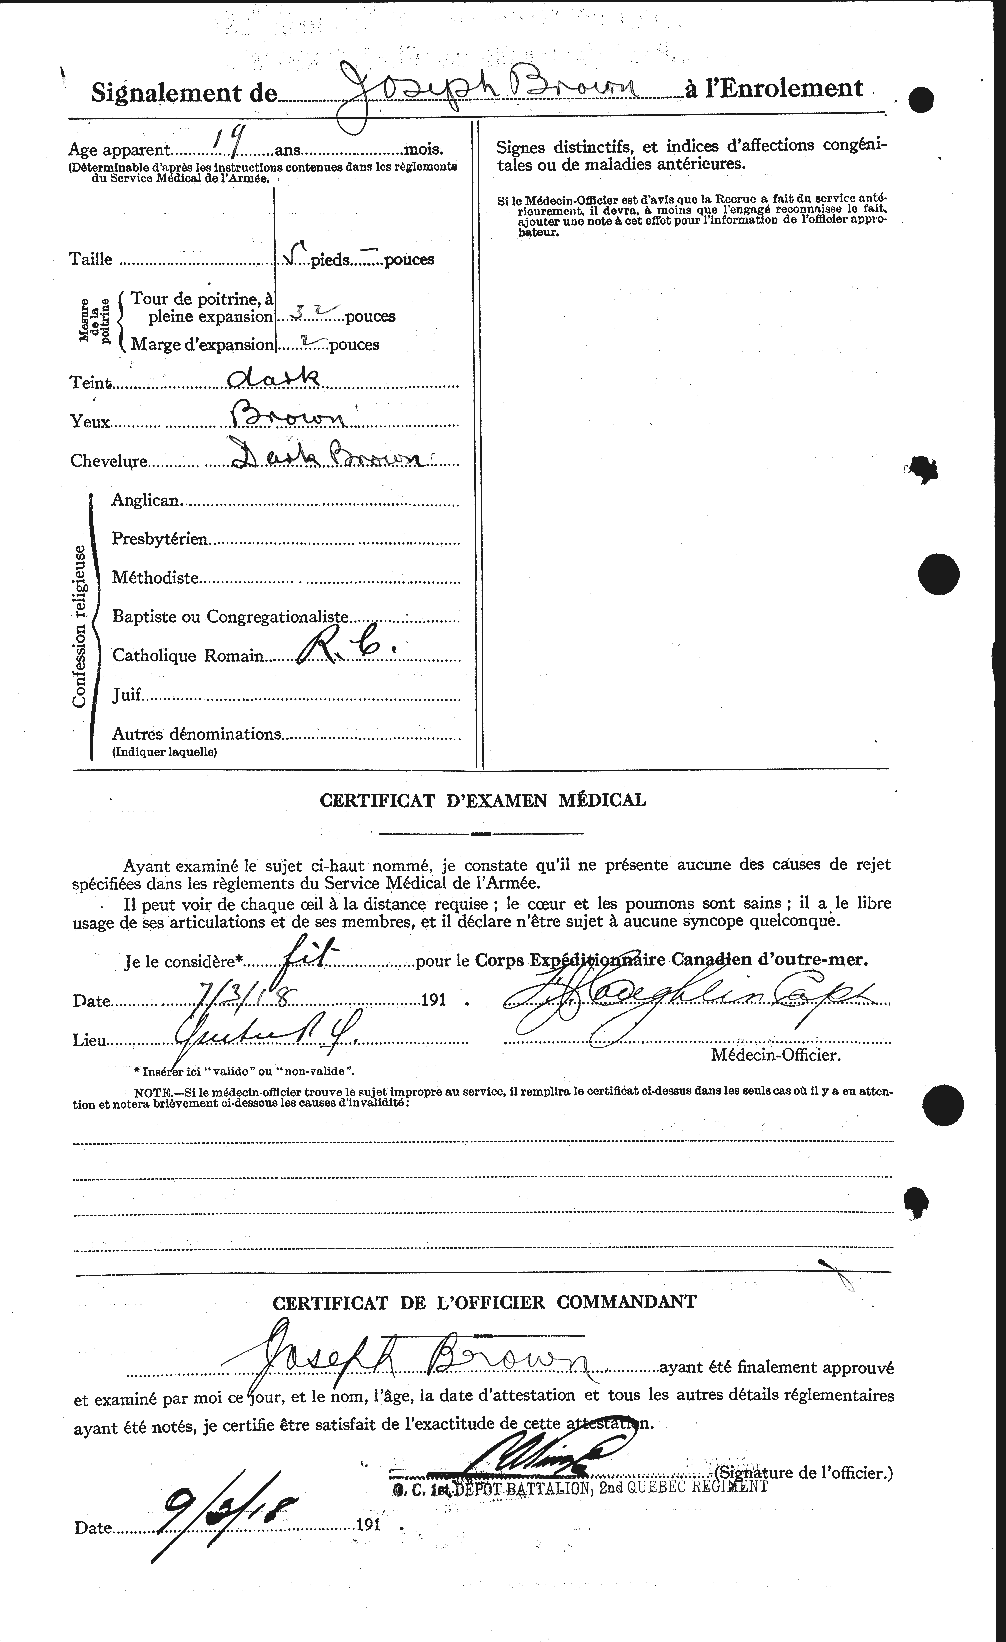 Personnel Records of the First World War - CEF 265946b